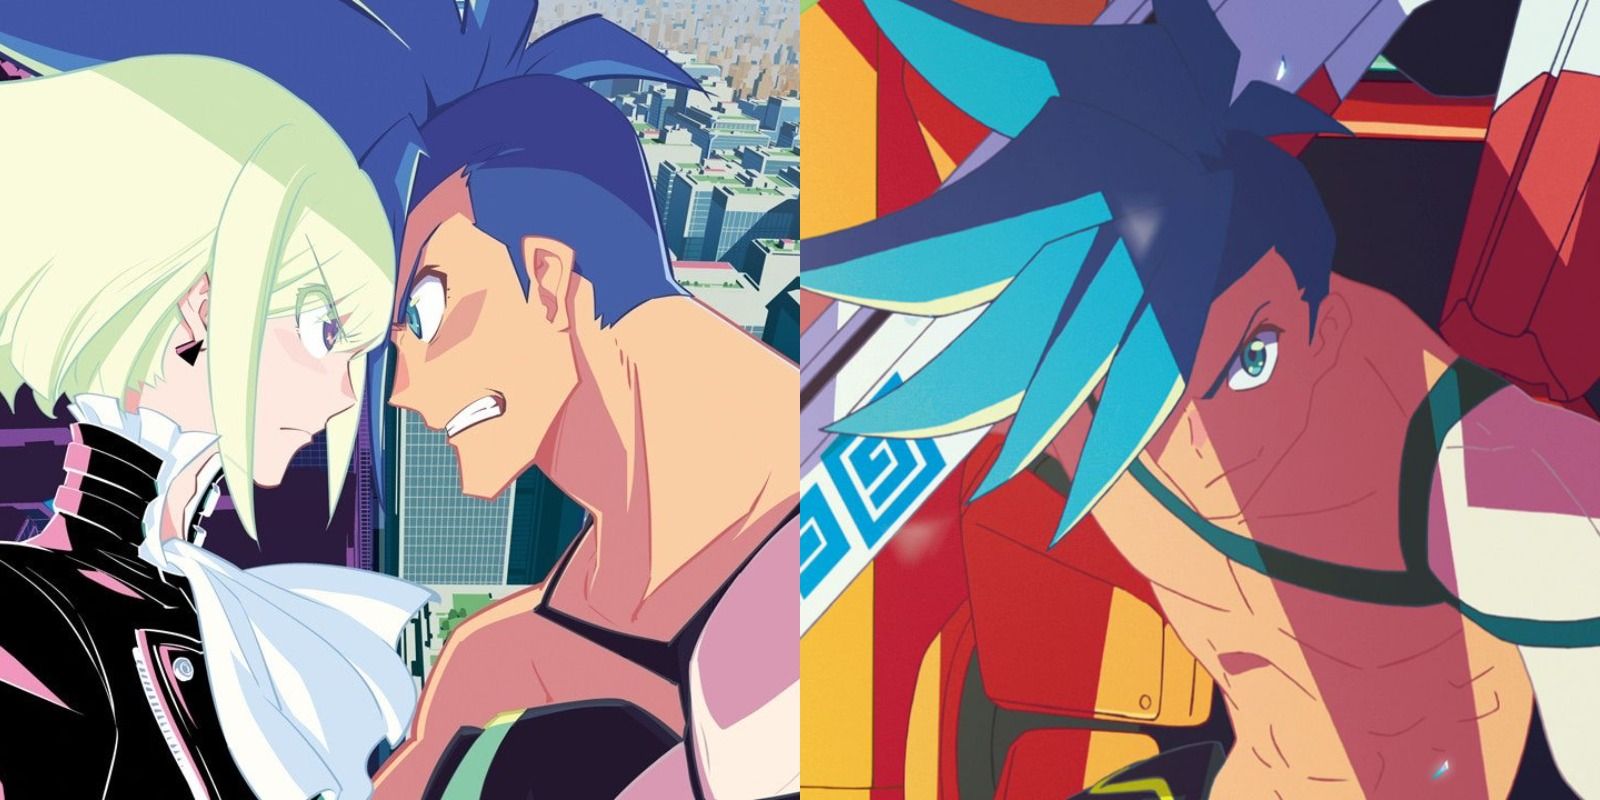 Lio and Galo in the Promare anime movie